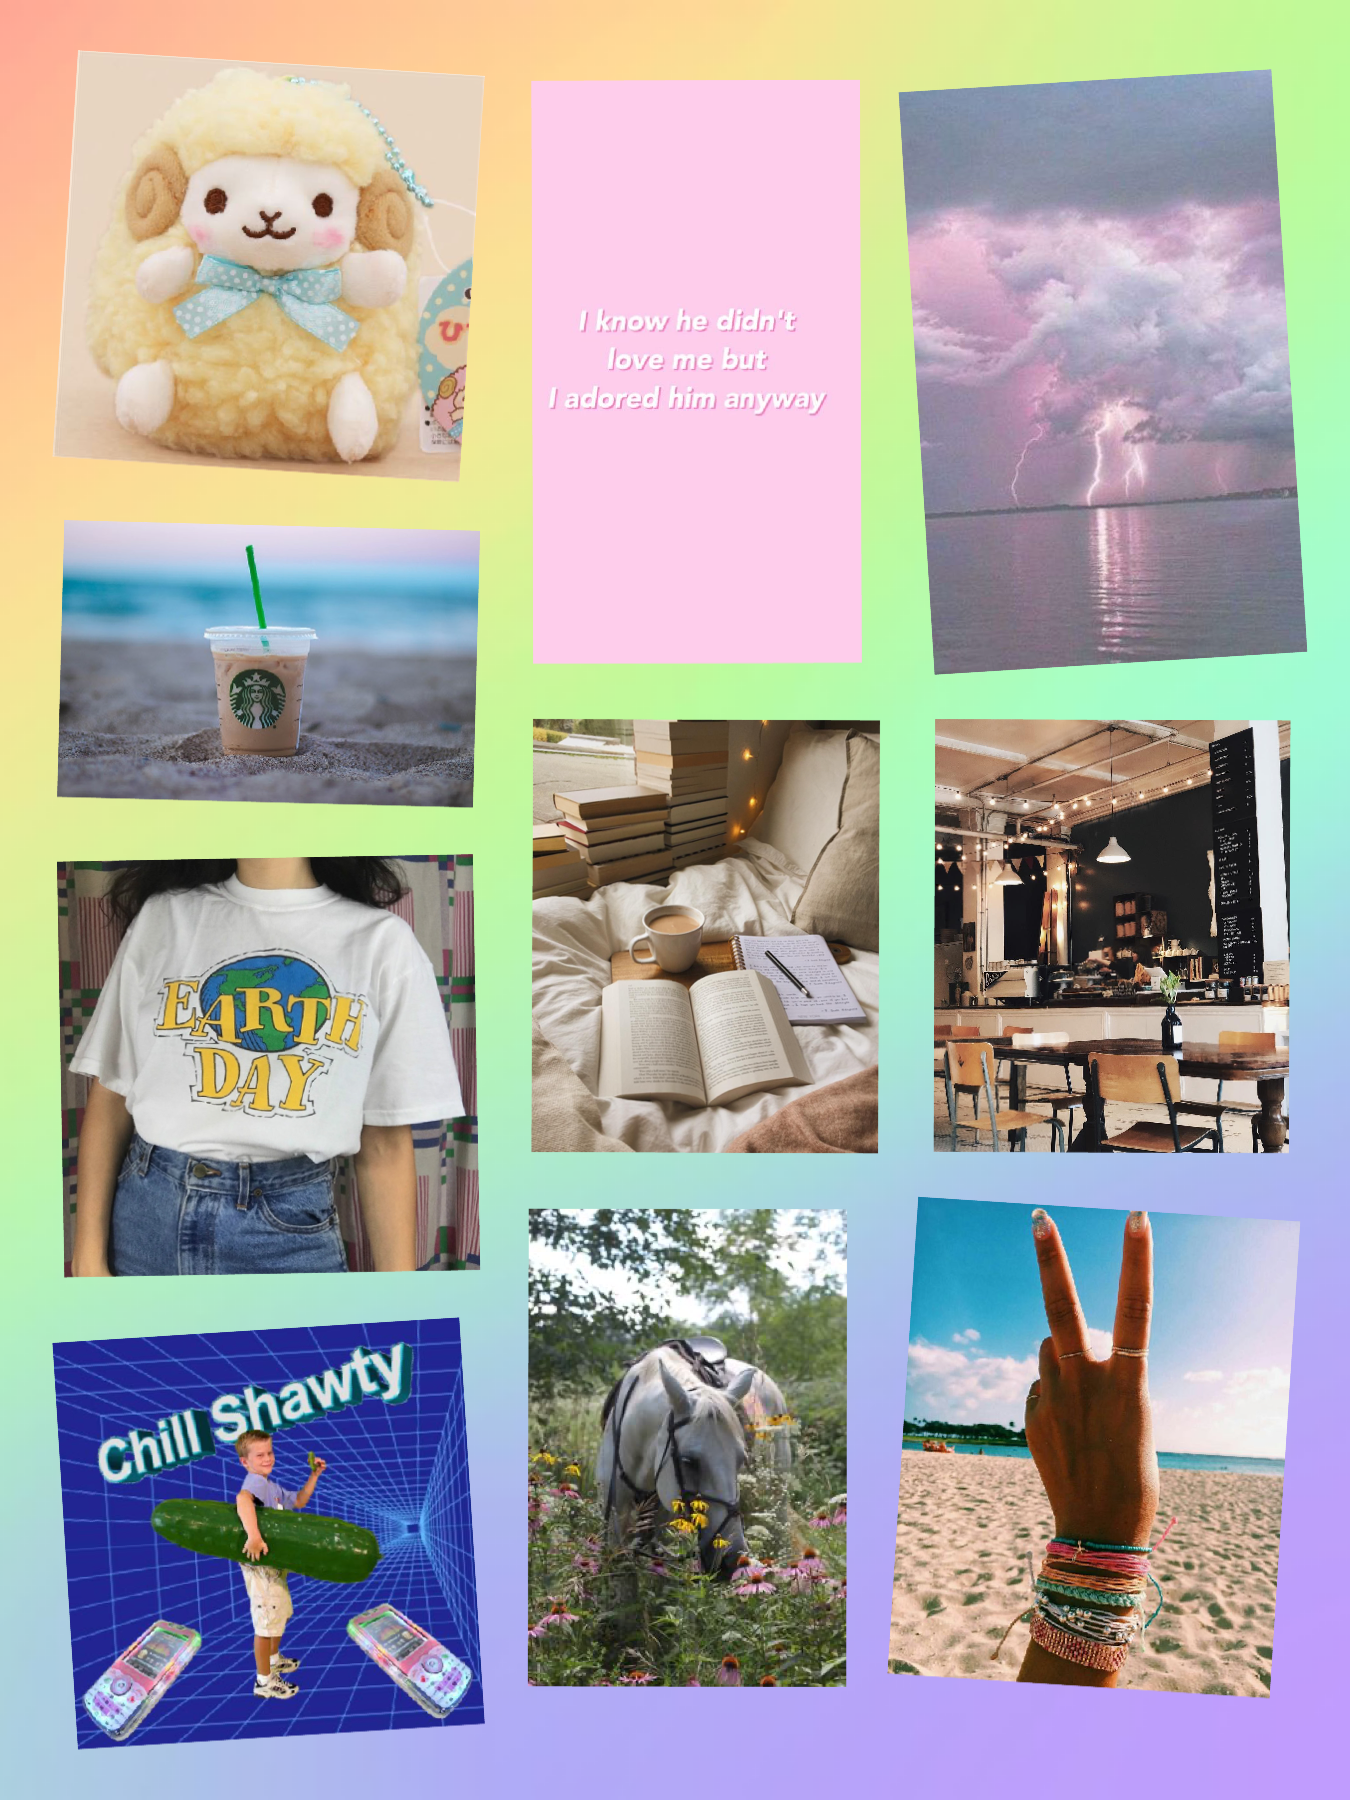 My gf asked me to make an aesthetic about my own aesthetic so here goes.